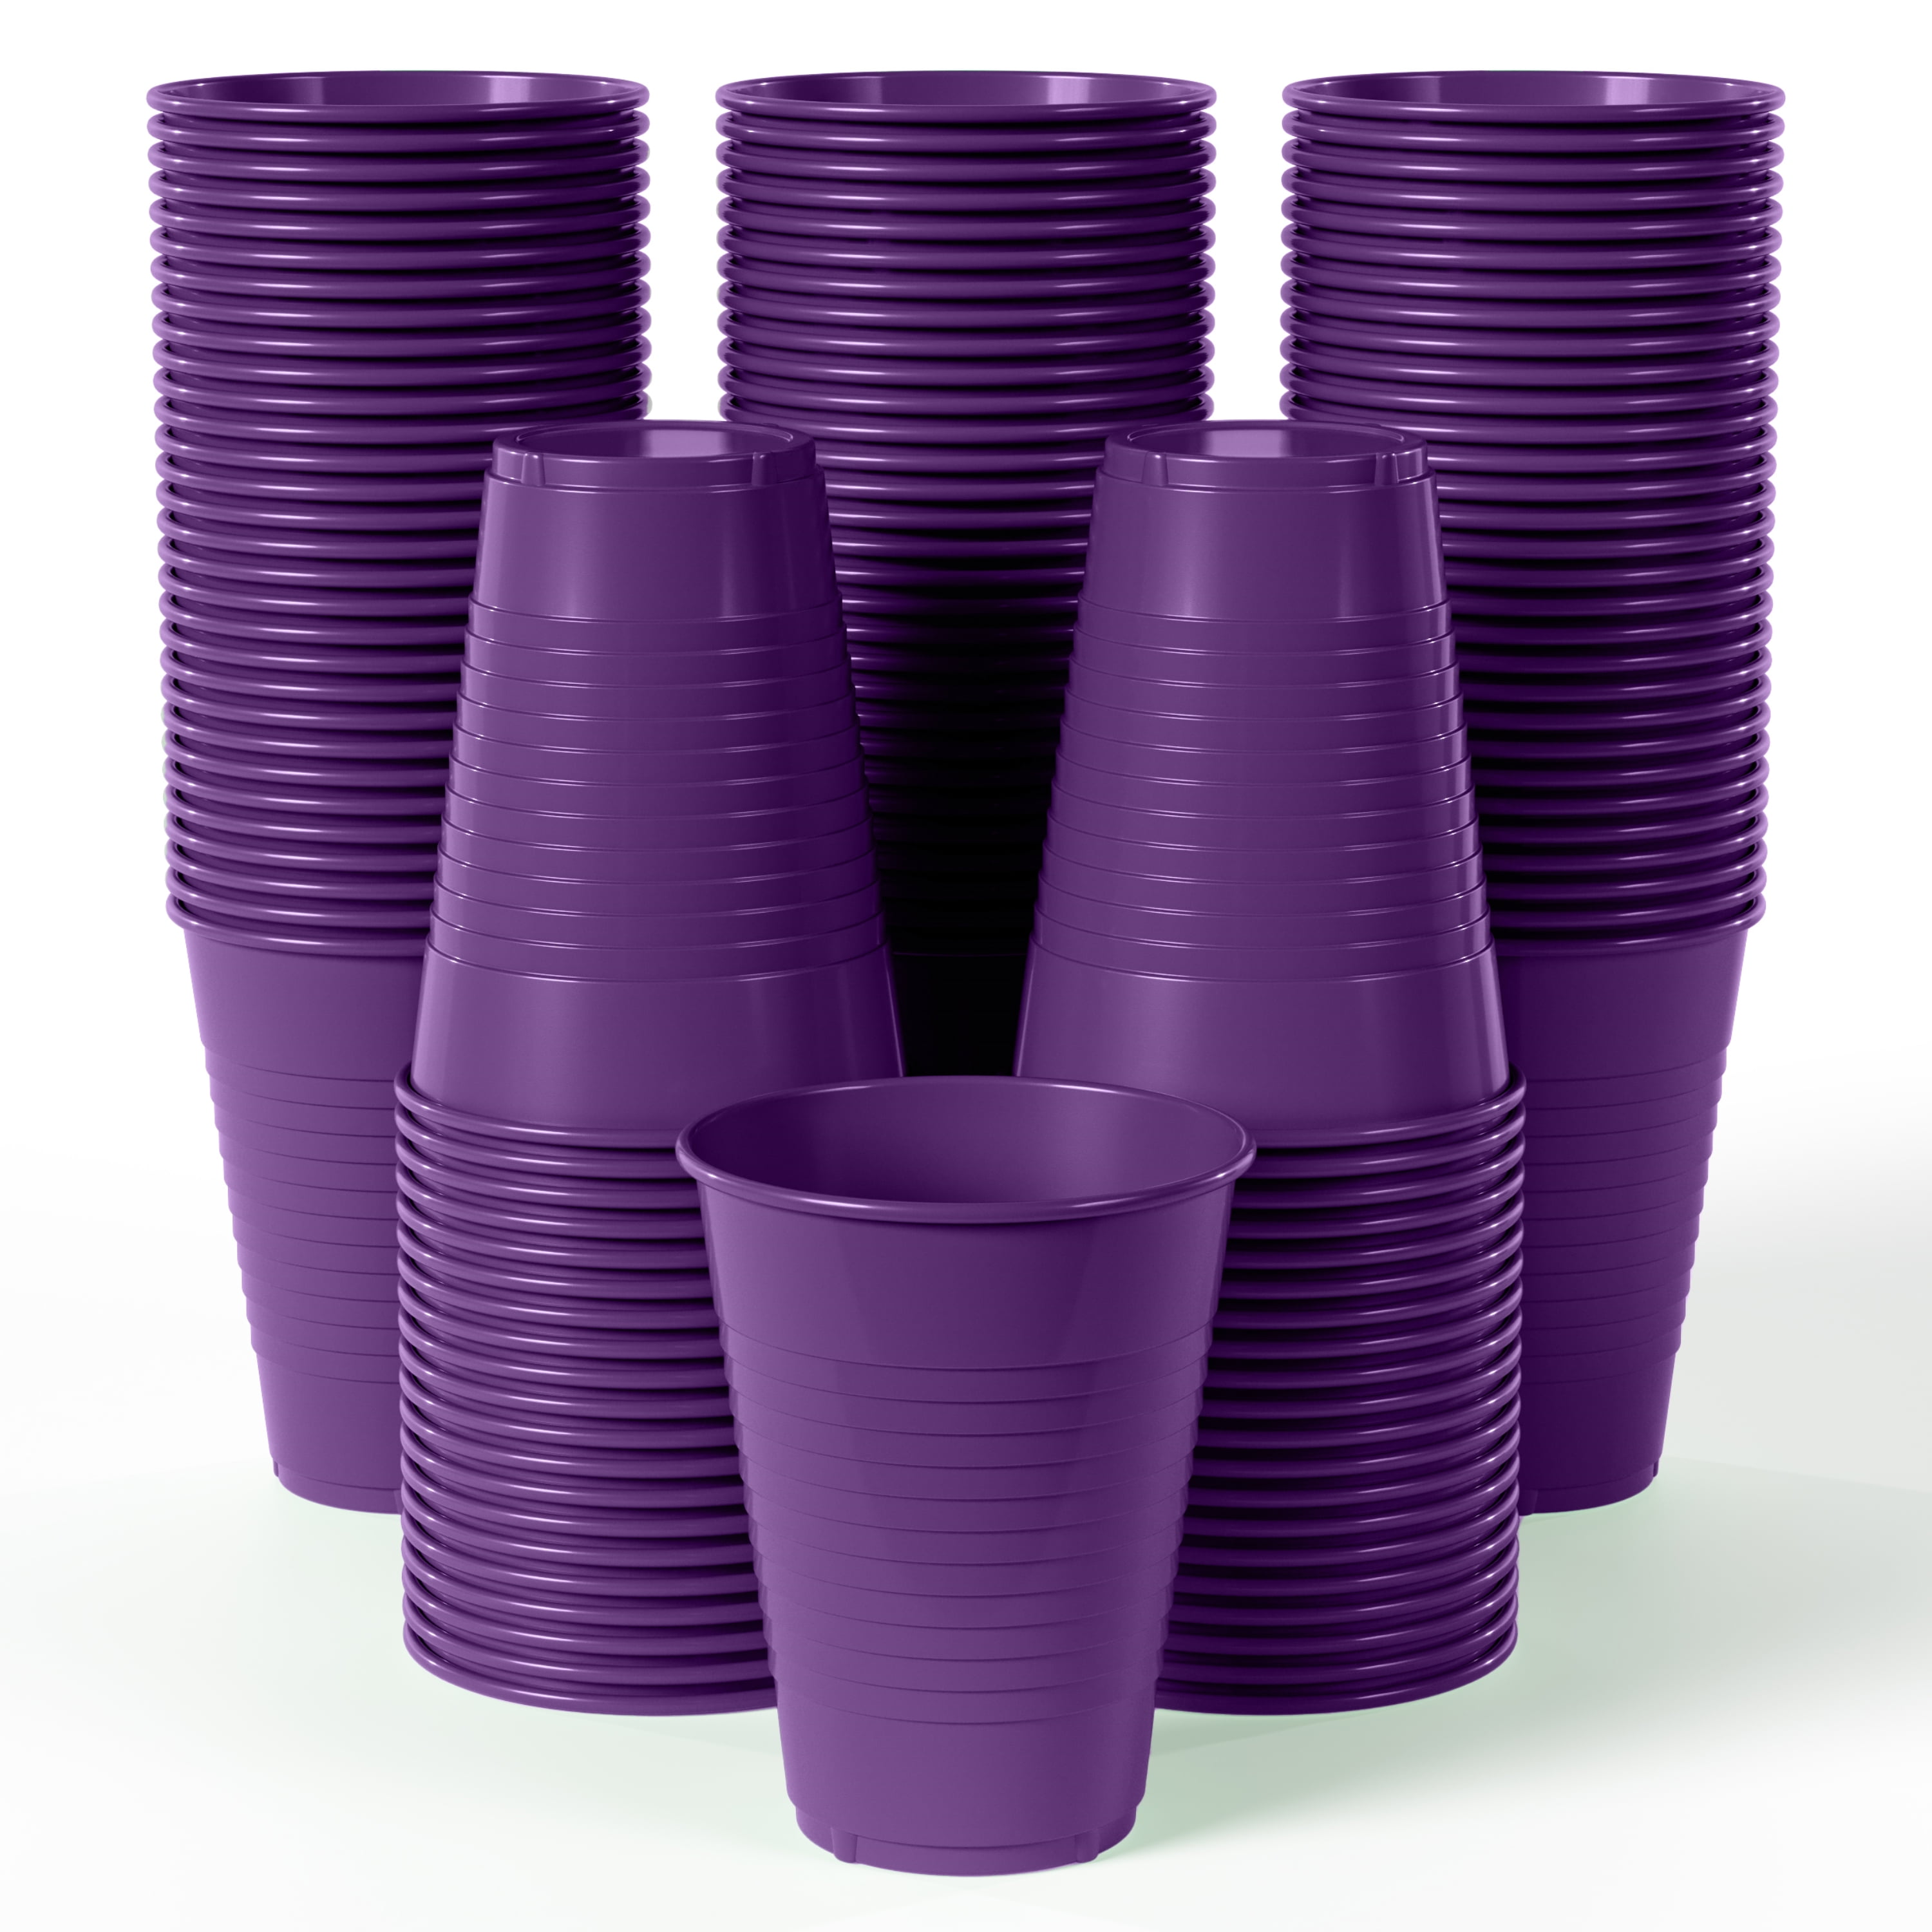 12 Ounce Purple Plastic Cups from Beads by the Dozen, New Orleans